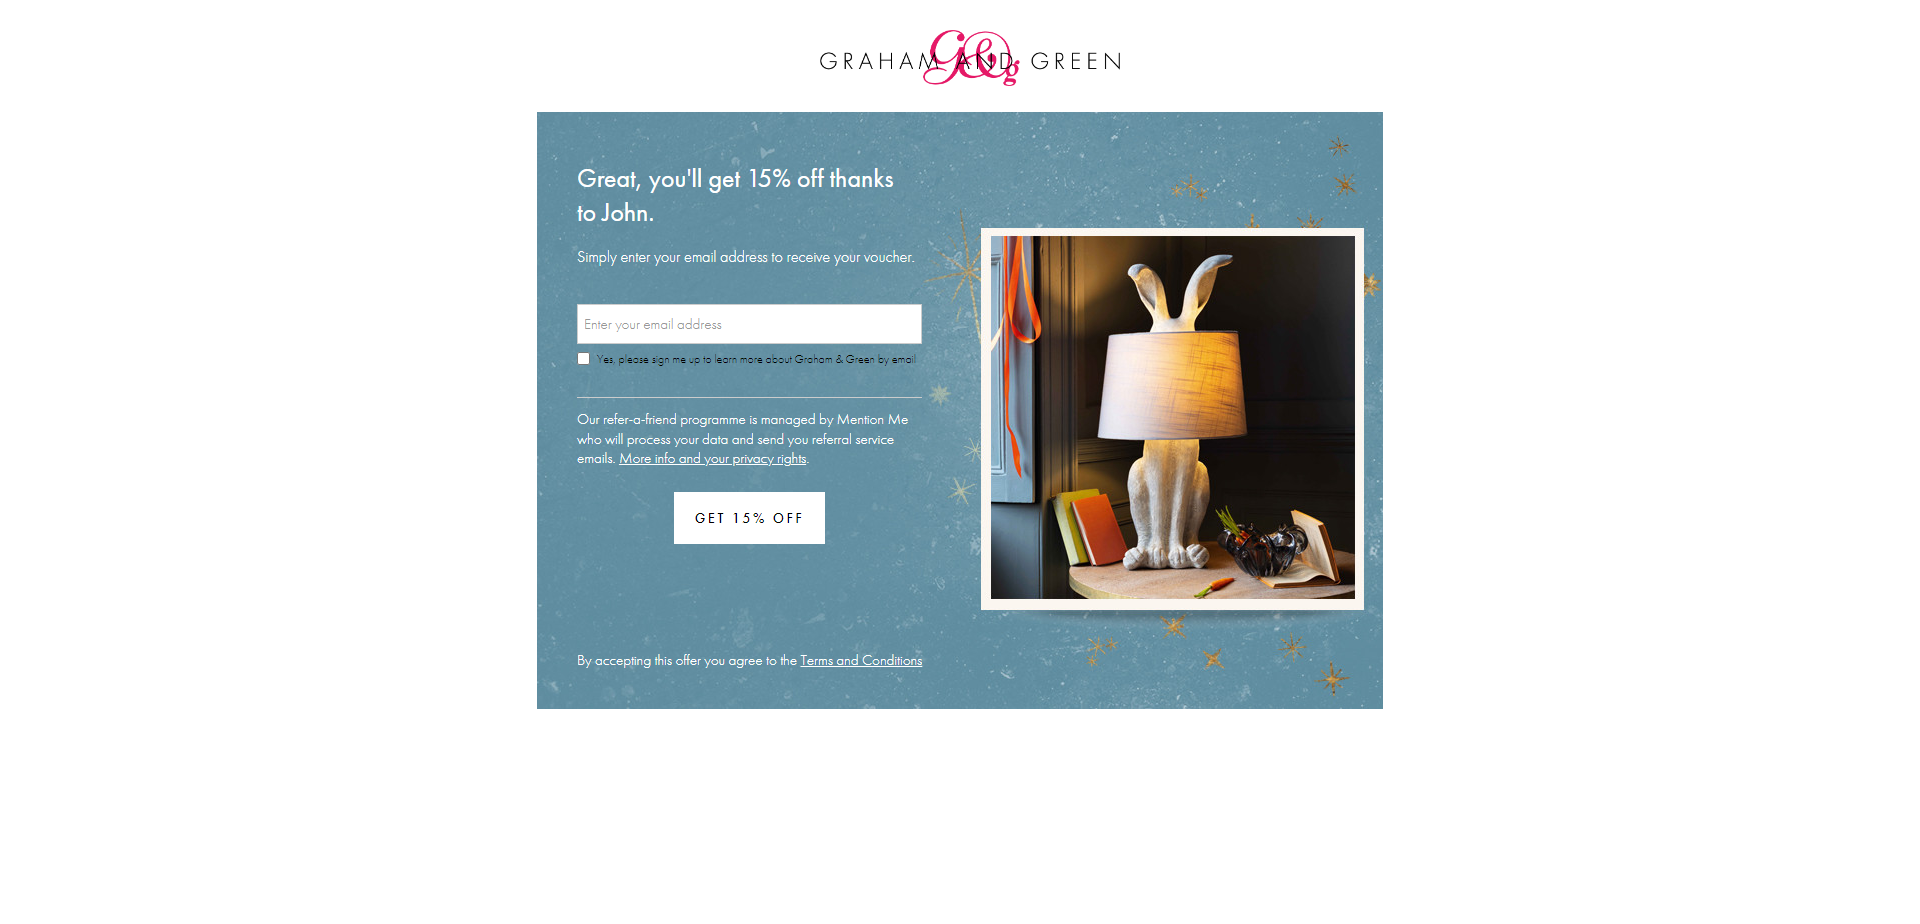 Landing Page for Graham and Green